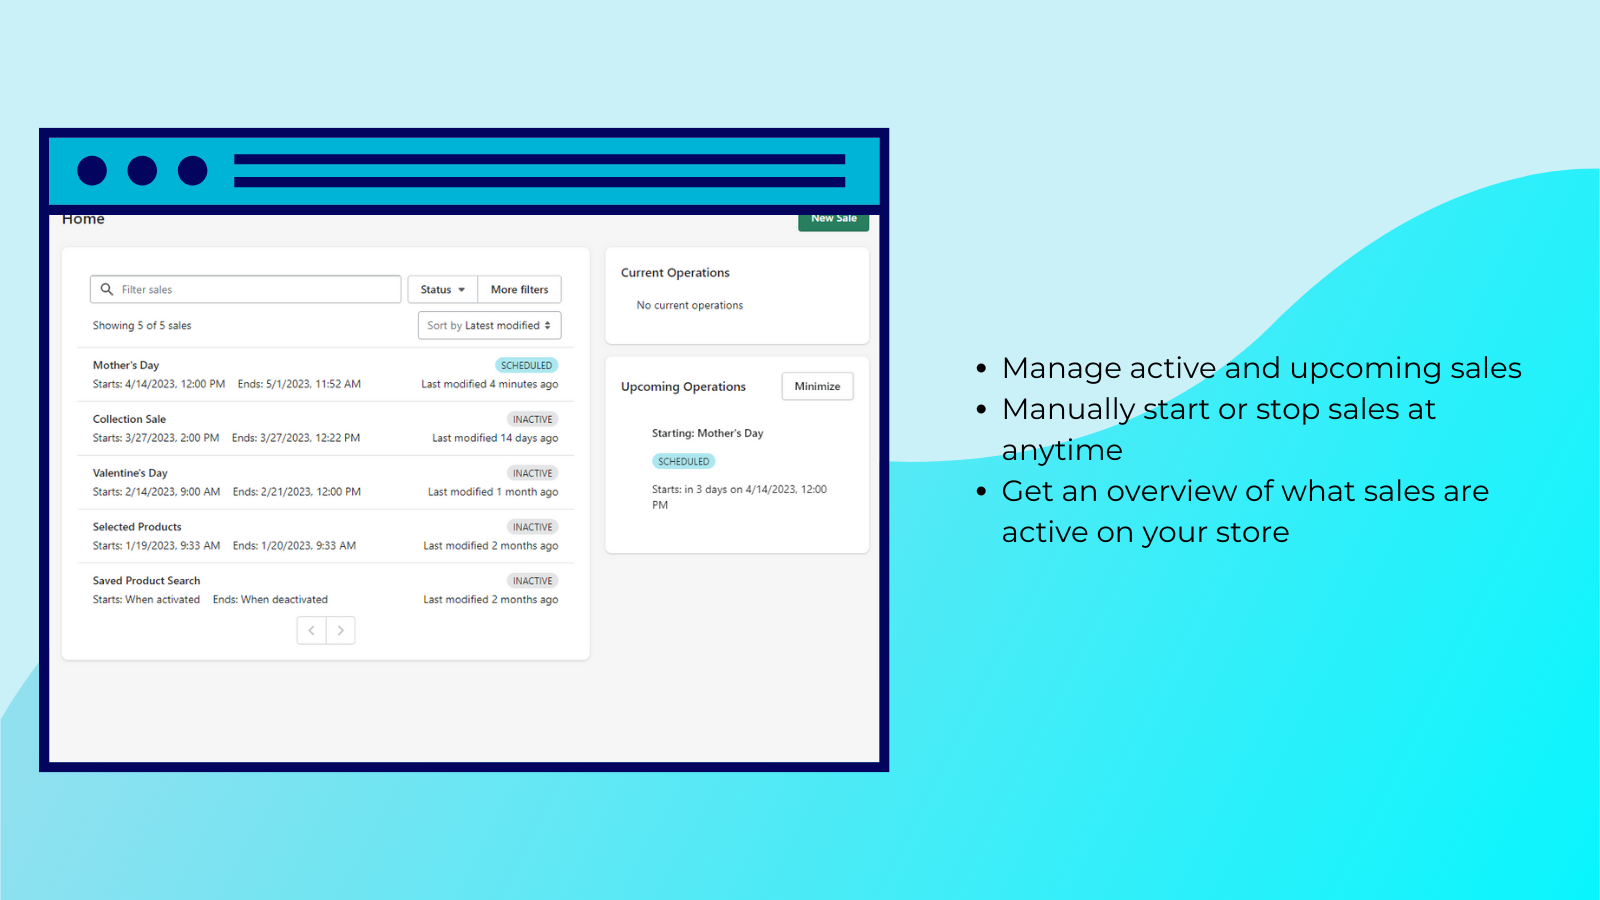 View and manage all active and upcoming sales